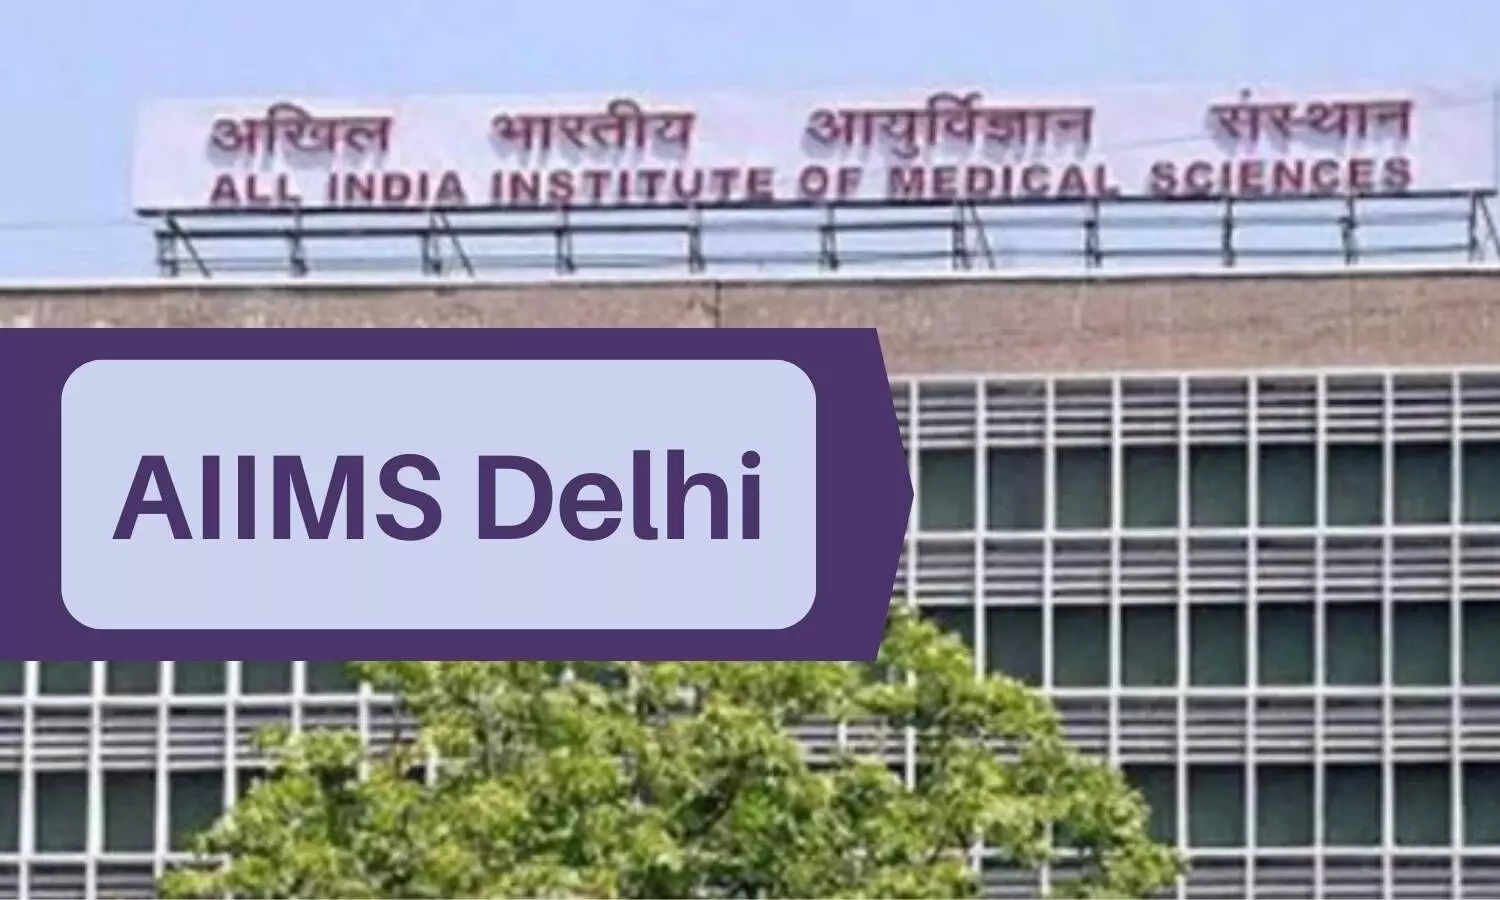 Medical legacy: Delhi AIIMS to set up museum of archives